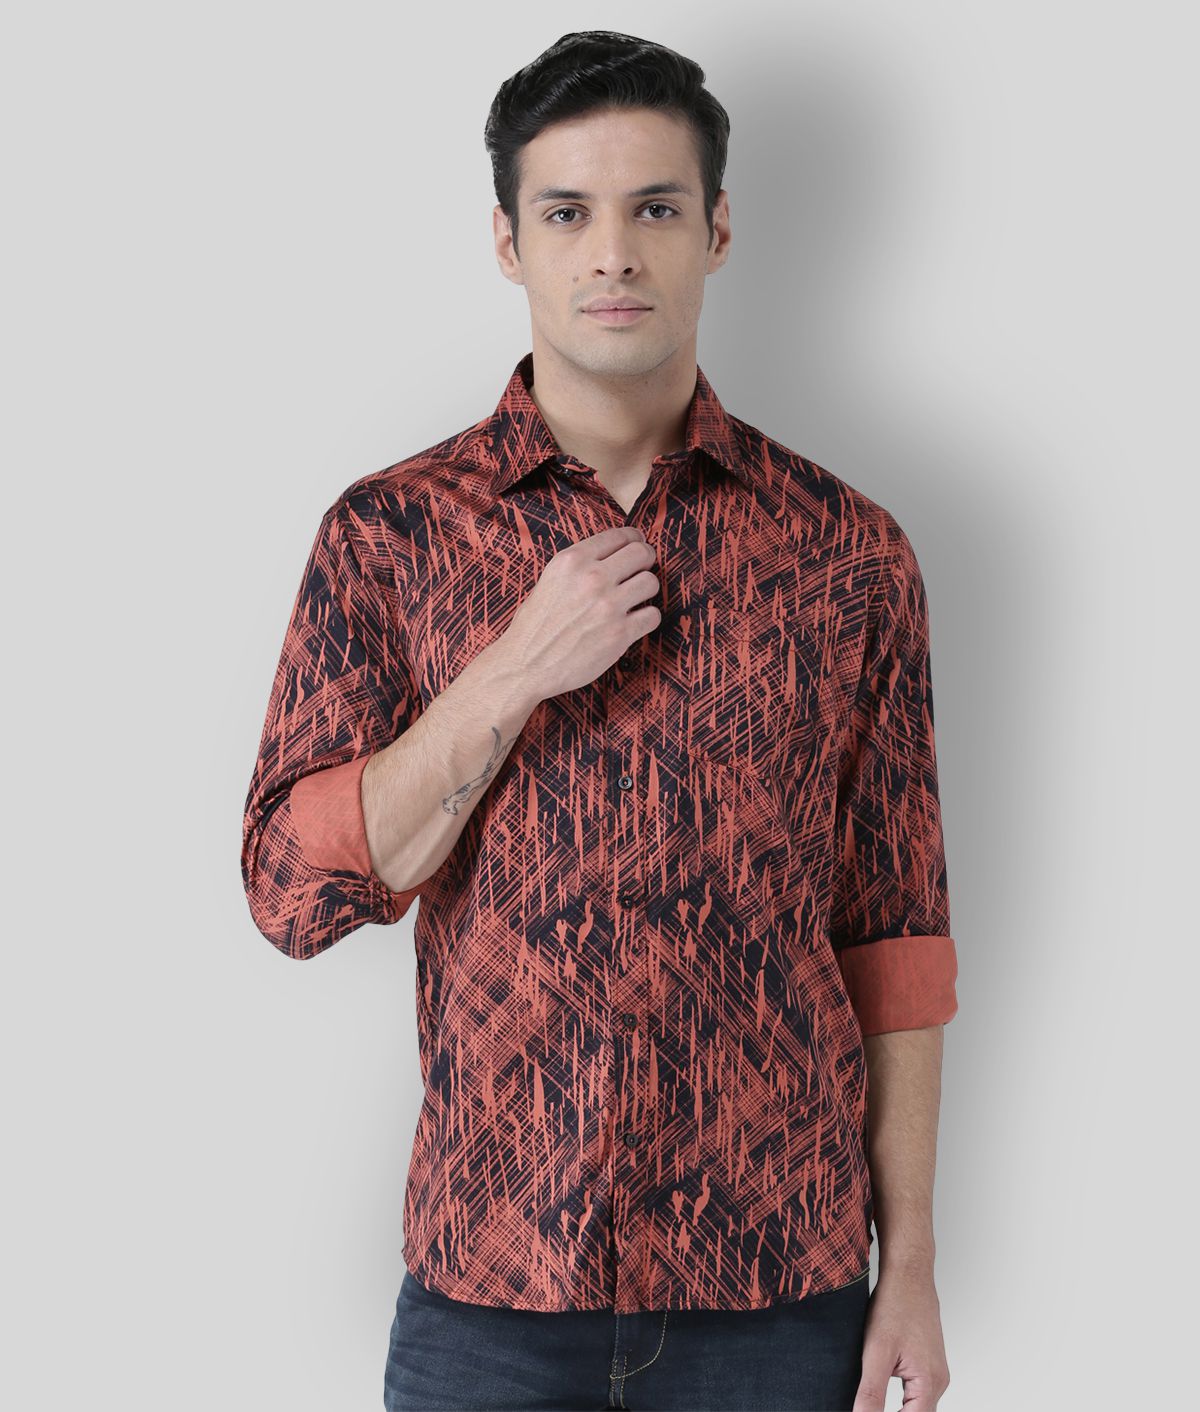 Zeal - Red Cotton Slim Fit Men's Casual Shirt ( Pack of 1 ) - Buy Zeal -  Red Cotton Slim Fit Men's Casual Shirt ( Pack of 1 ) Online at Best Prices  in India on Snapdeal